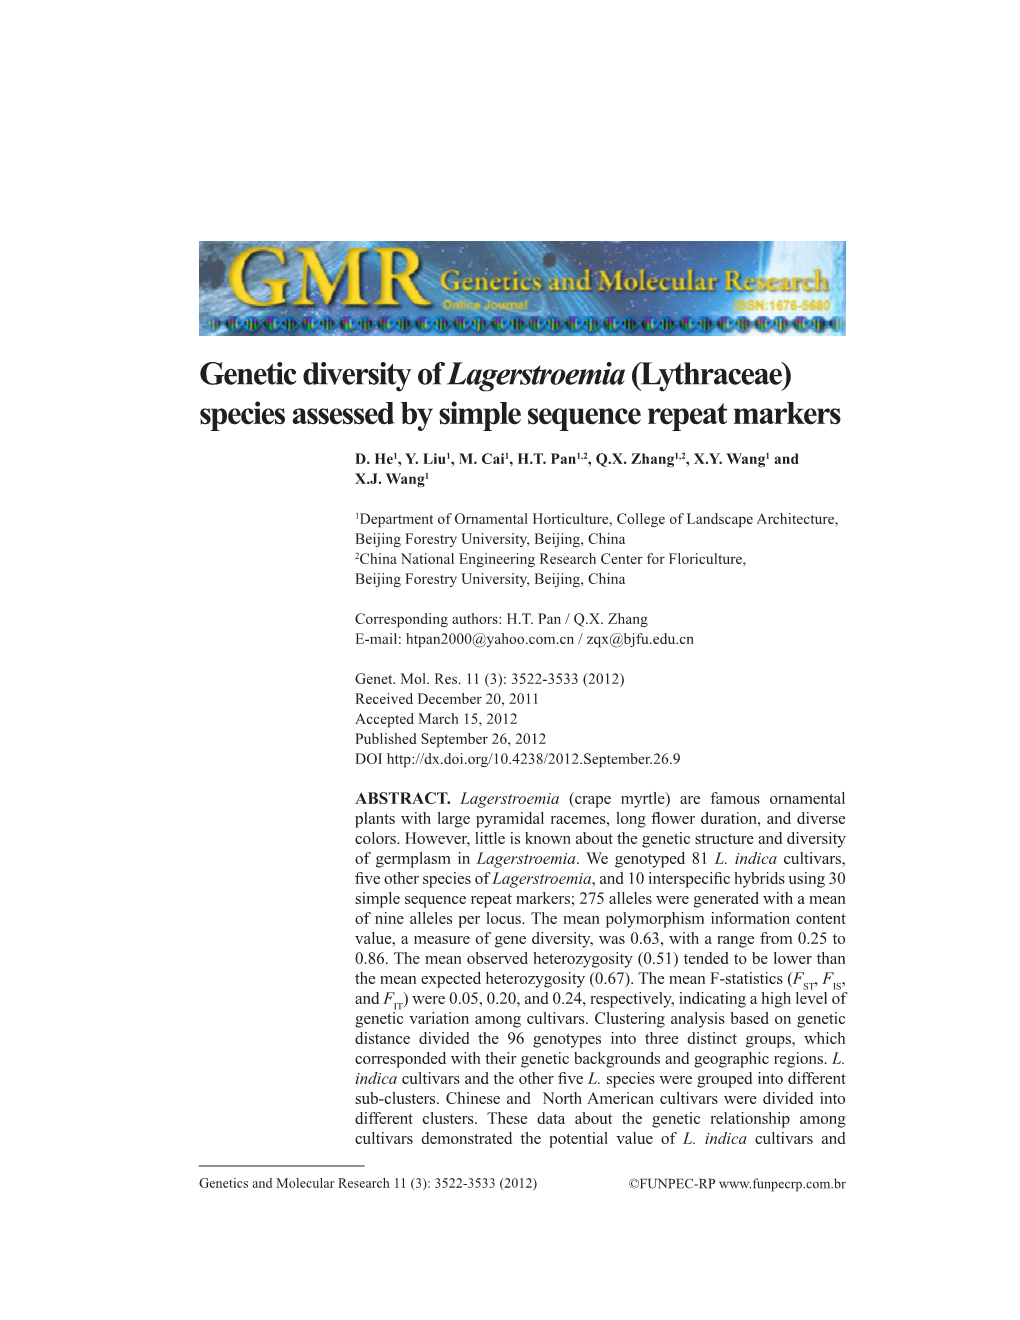 Genetic Diversity of Lagerstroemia (Lythraceae) Species Assessed by Simple Sequence Repeat Markers